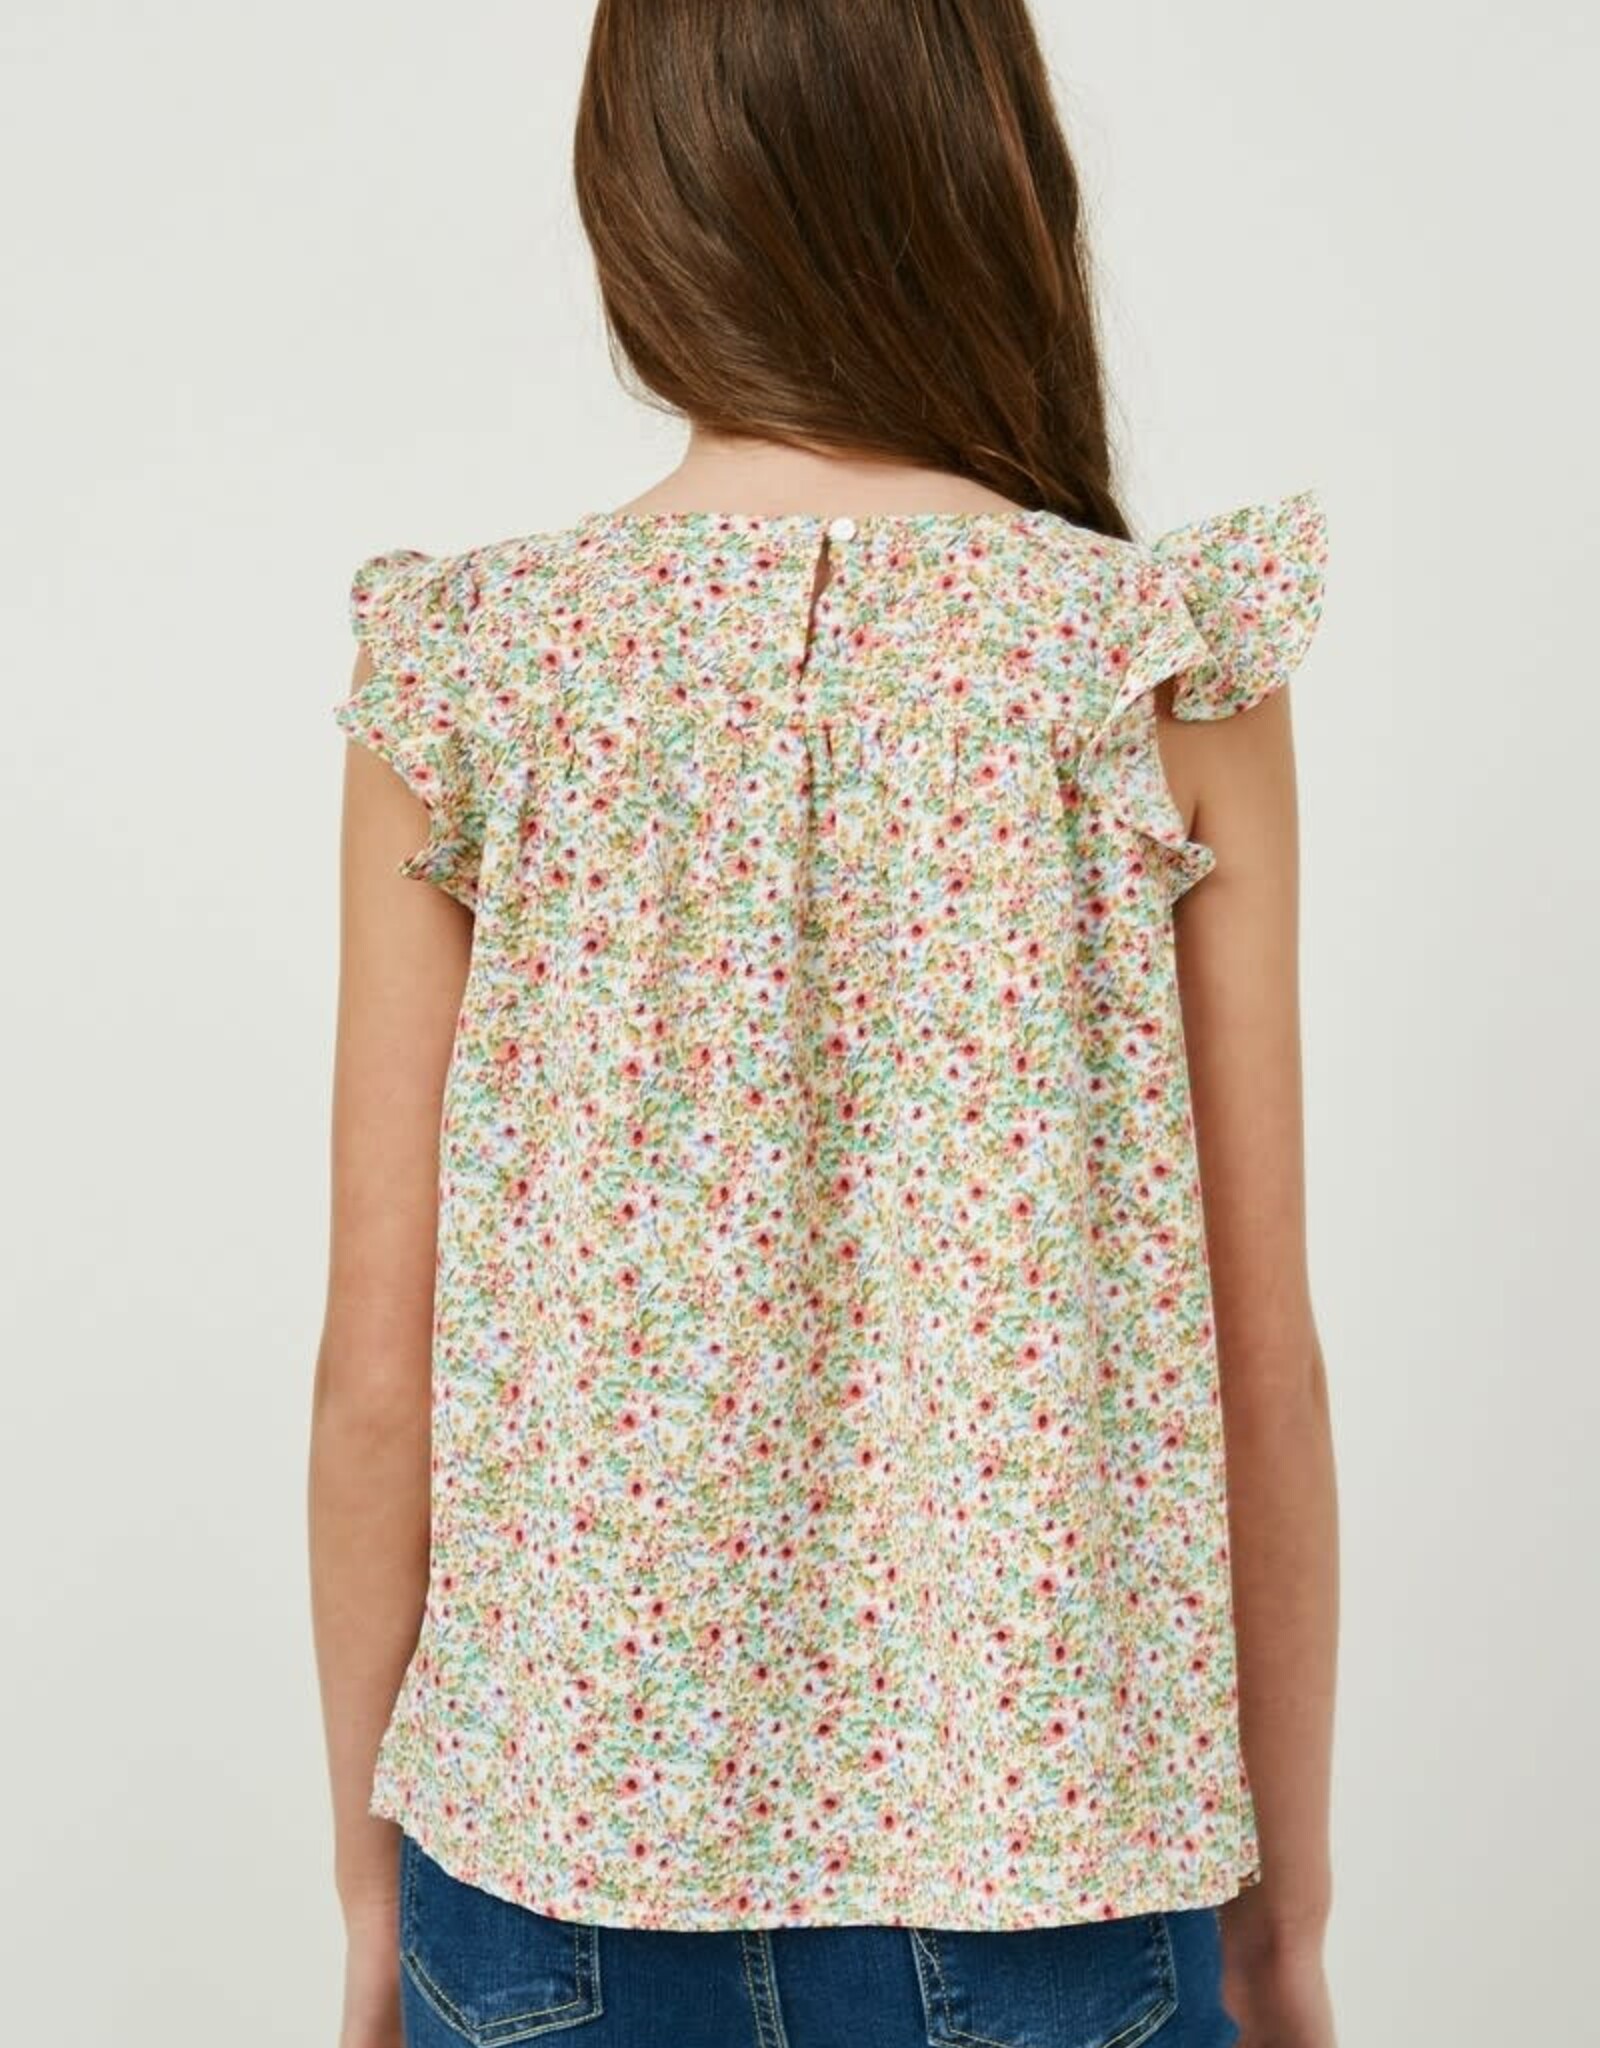 Hayden Lacey Top in Mint Floral